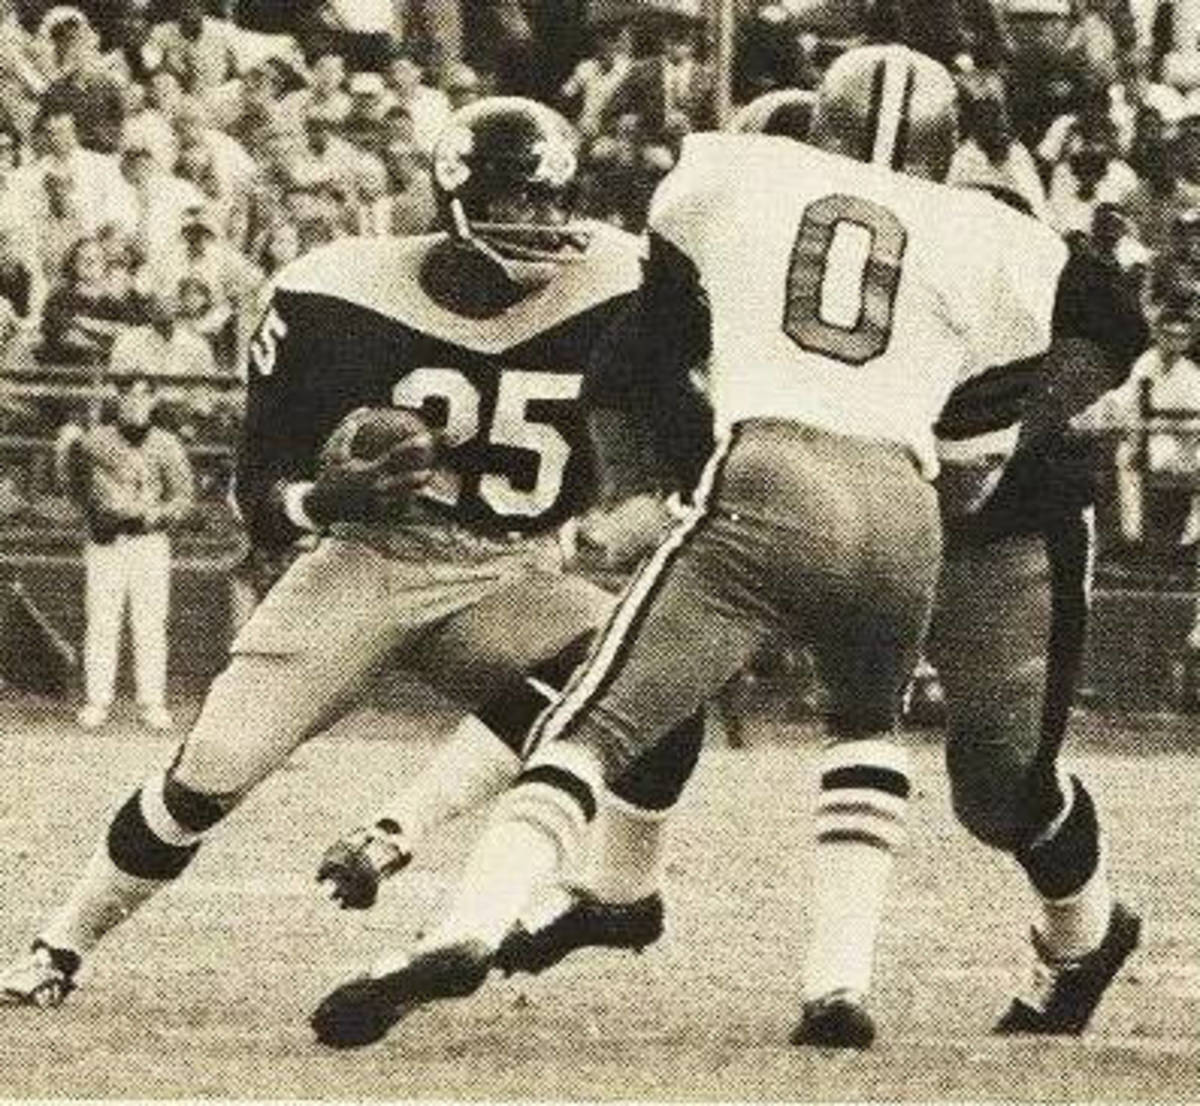 New Orleans Saints S Obert Logan (0) against the Pittsburgh Steelers during a game in 1967. Credit: Nosaintshistory.com